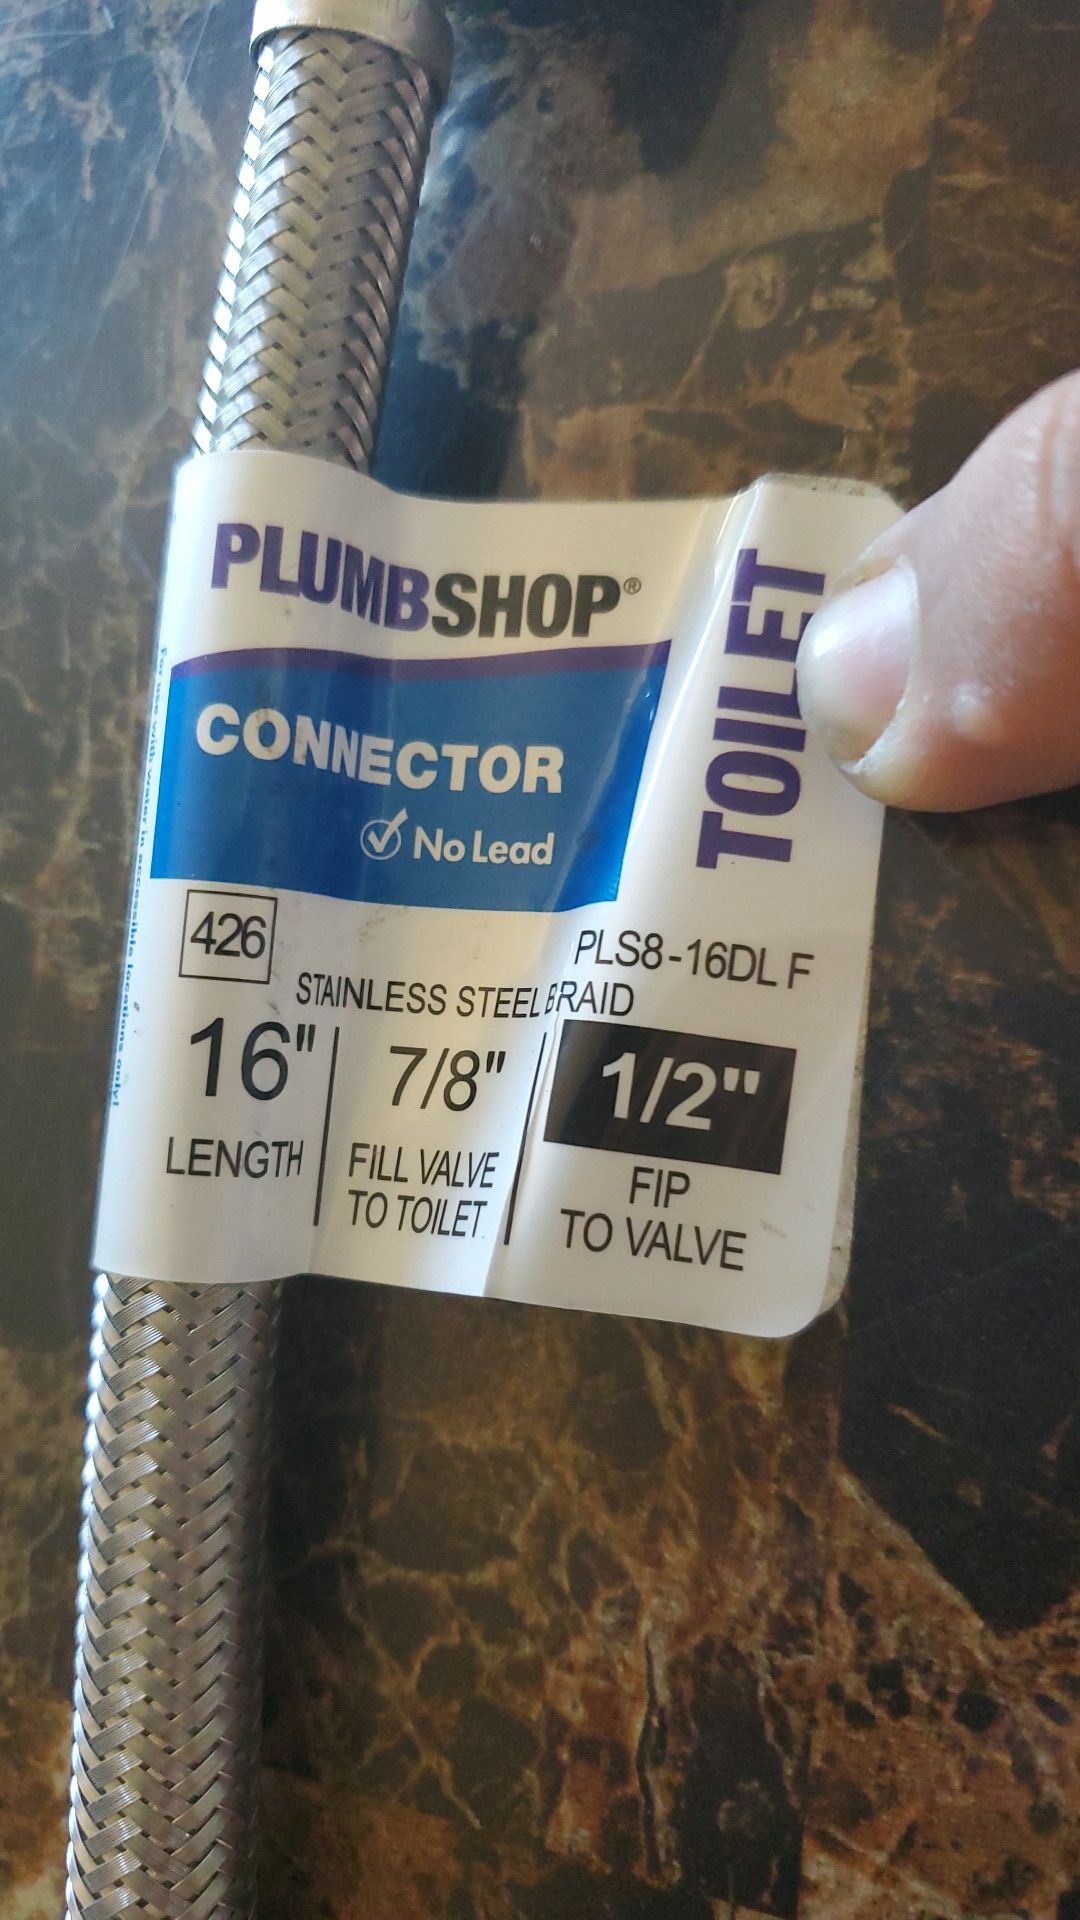 Connector stainless teel 7/"8. 1/2"